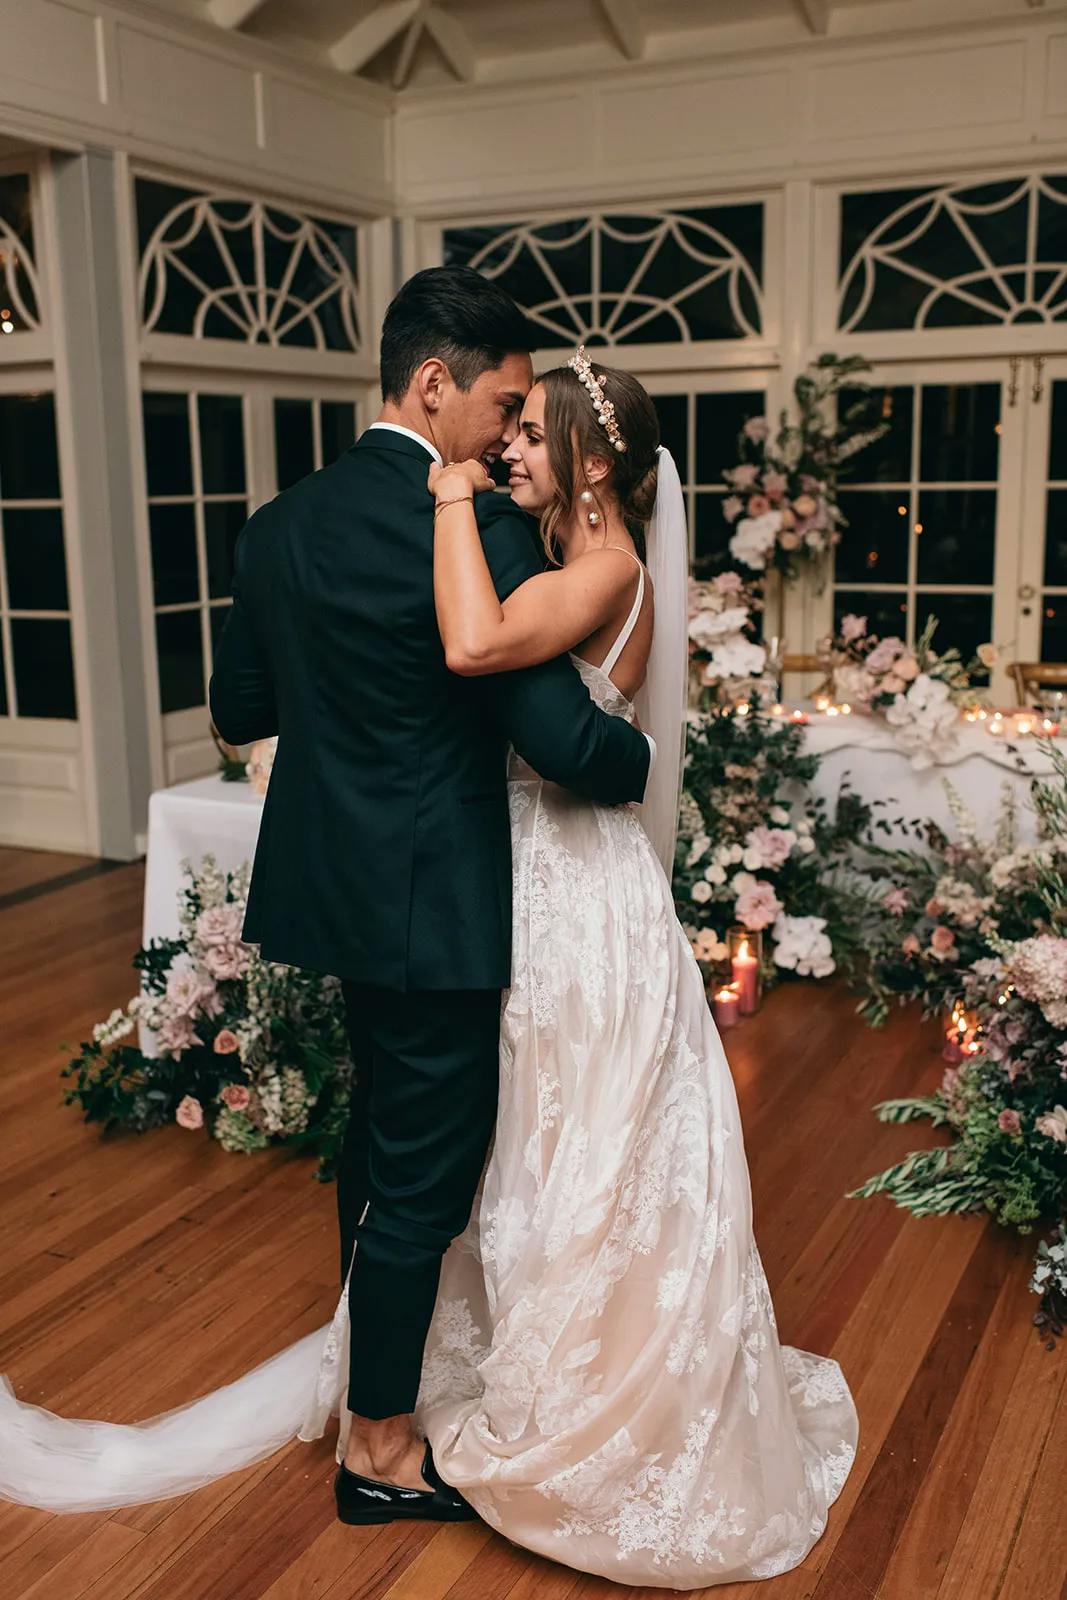 A bride and groom share a dance at their wedding reception. The bride, in a white lace gown and veil, smiles as she embraces the groom, who is wearing a black suit. The venue is elegantly decorated with floral arrangements and soft lighting, creating a romantic atmosphere.